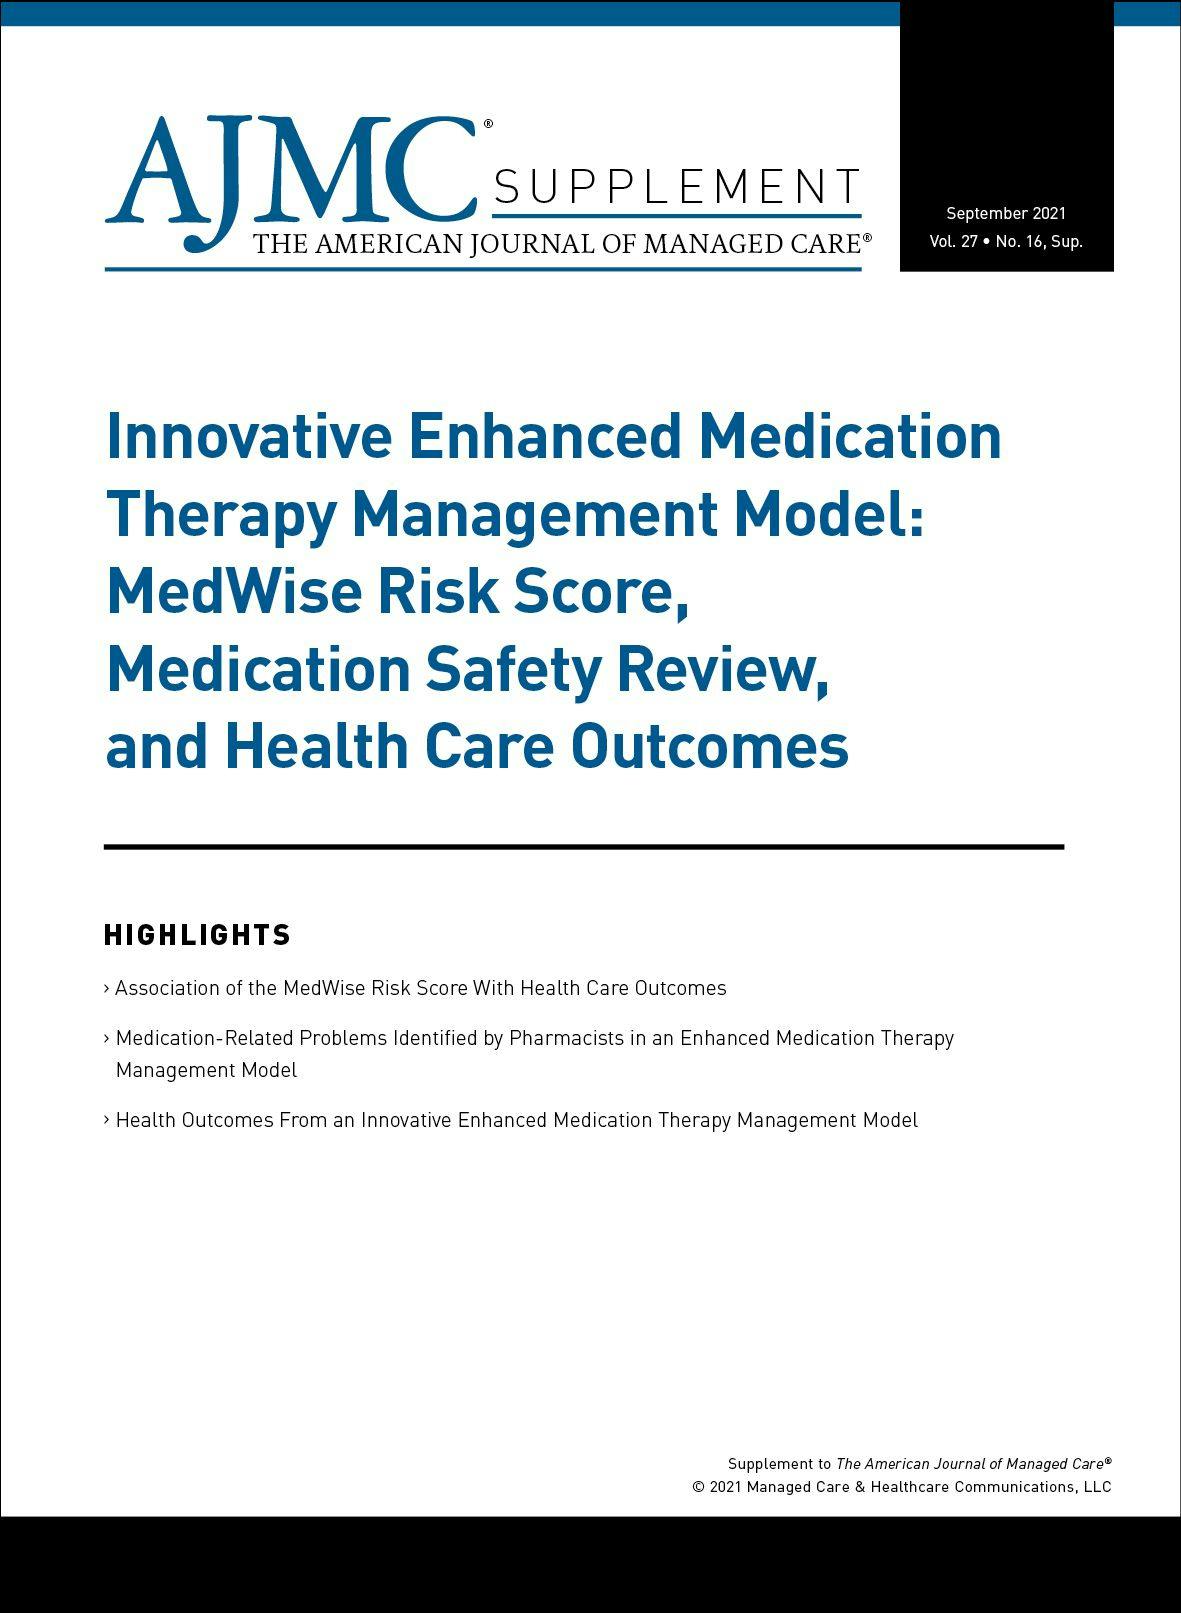 AJMC Supplement Cover for Examining the Benefit of an Innovative Enhanced Medication Therapy Management Model